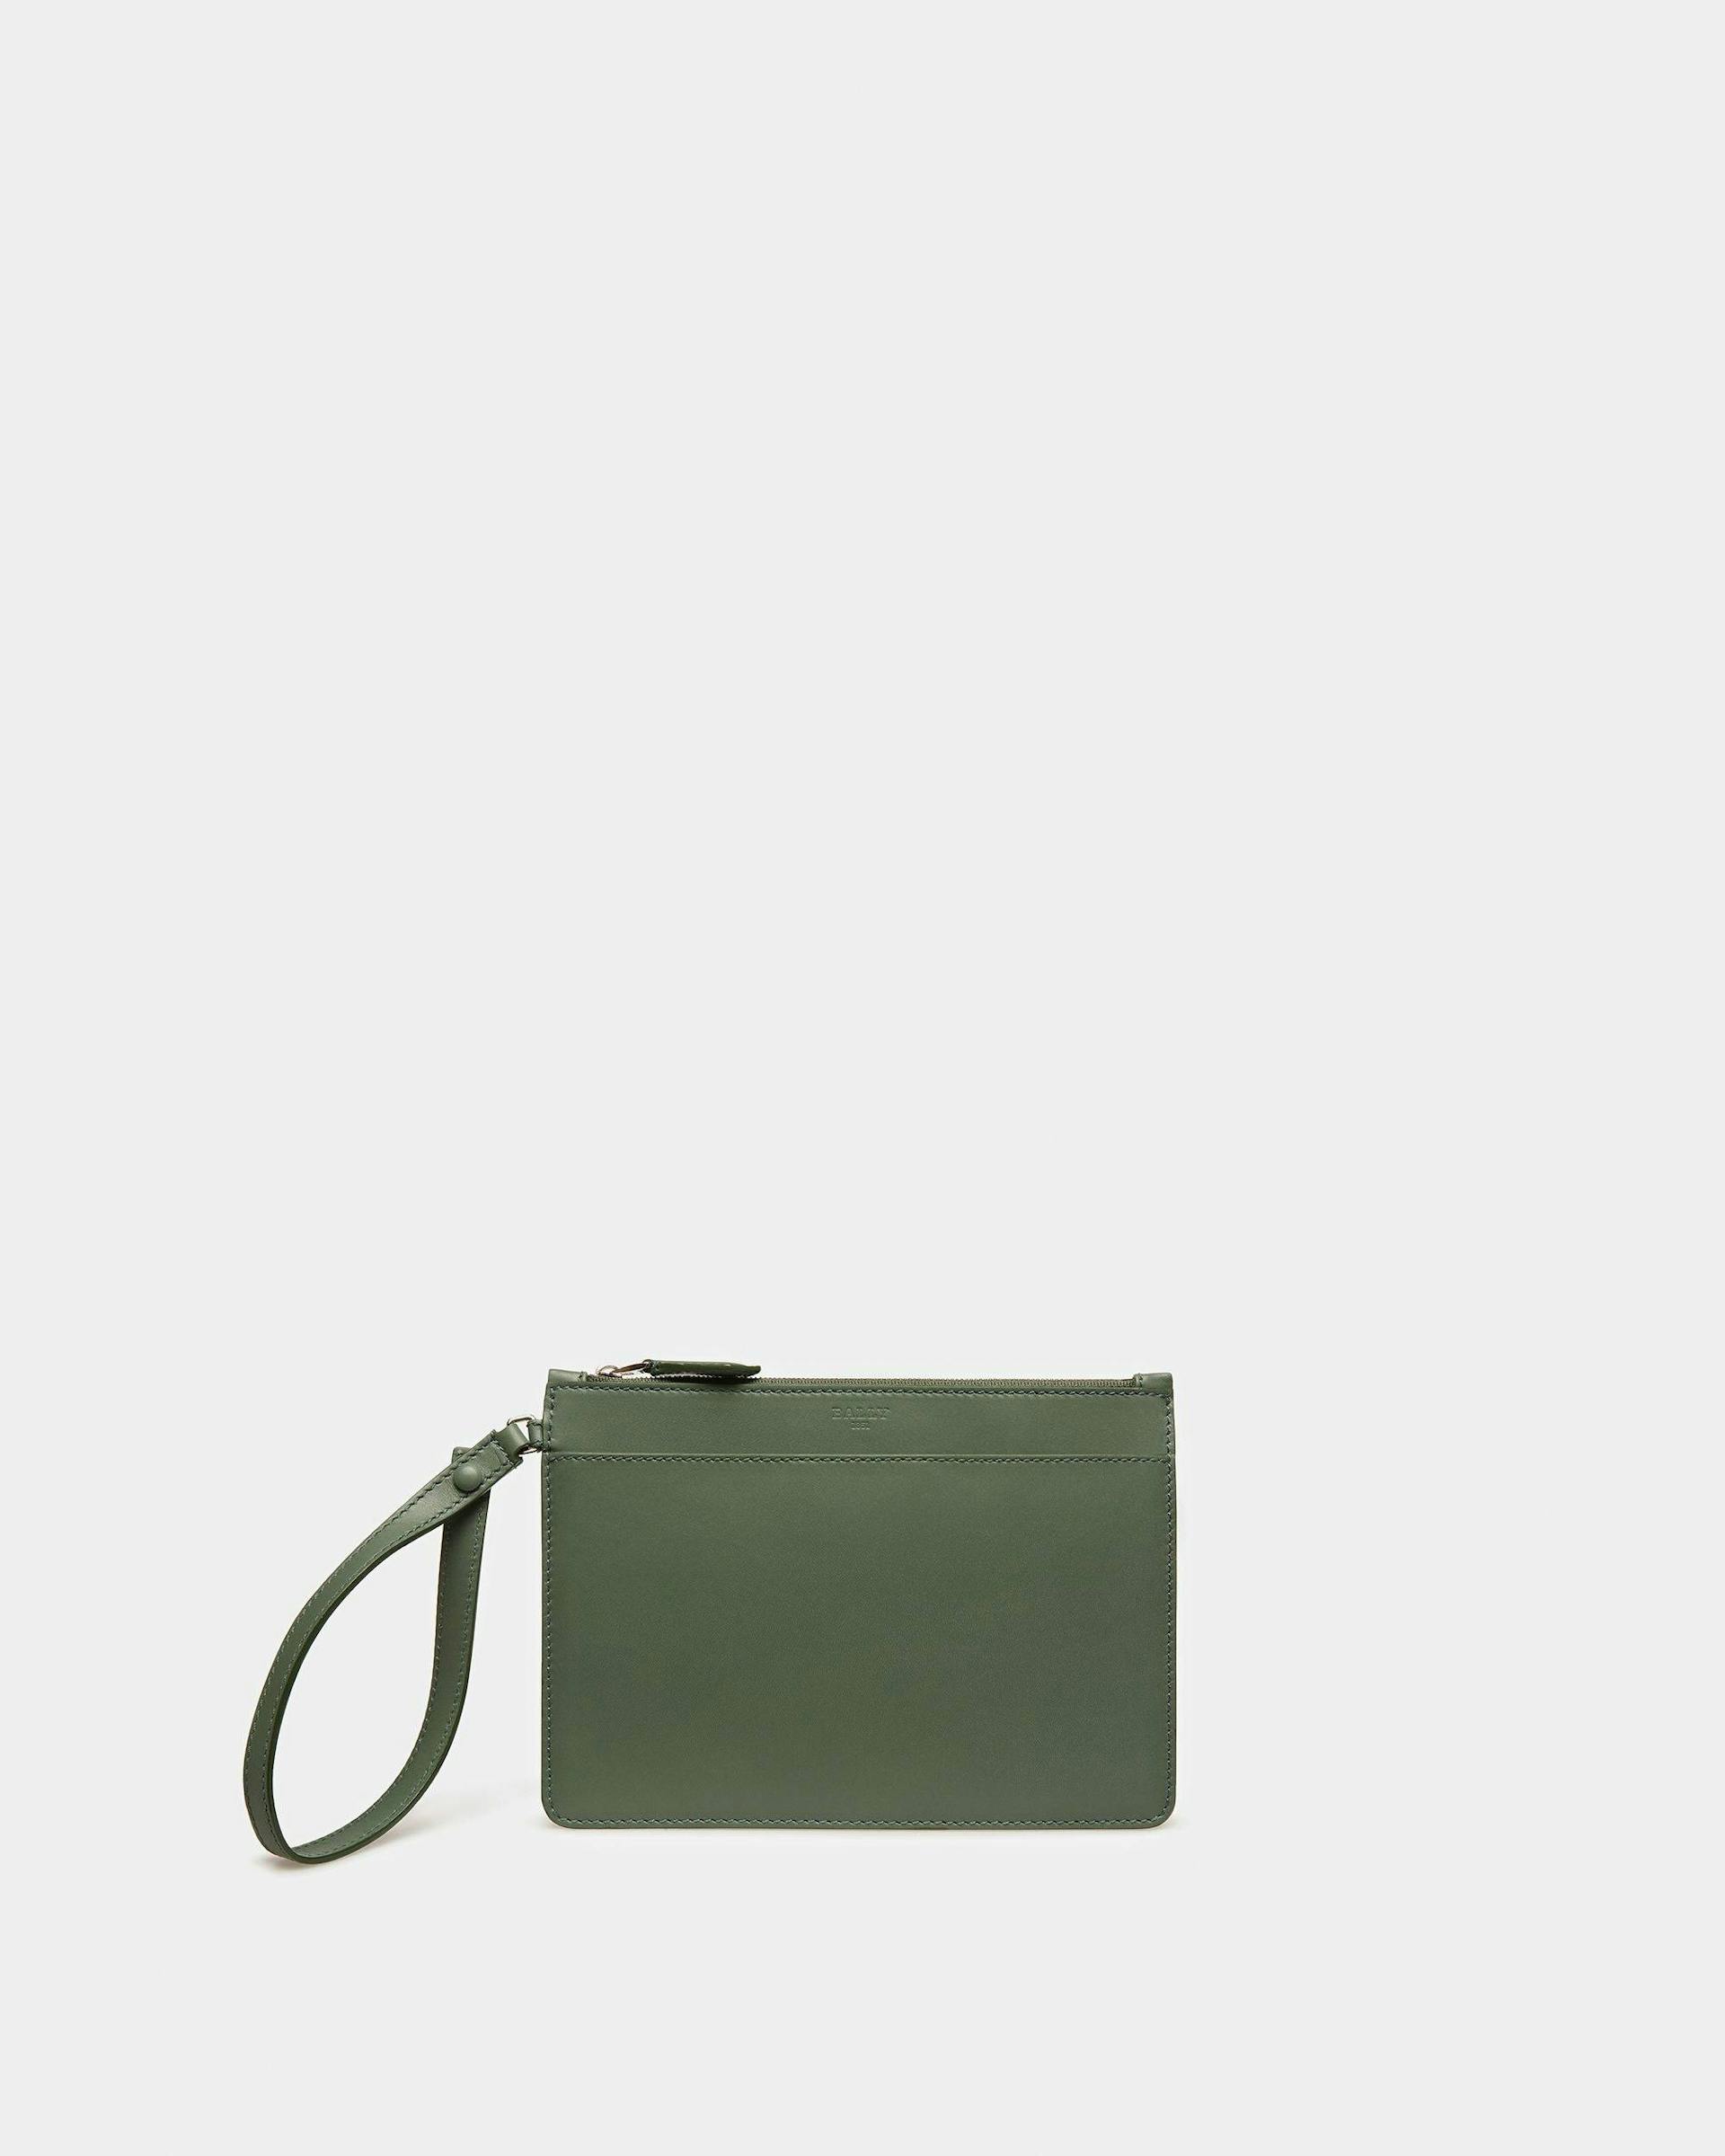 Ahria Leather Tote In Sage - Women's - Bally - 07